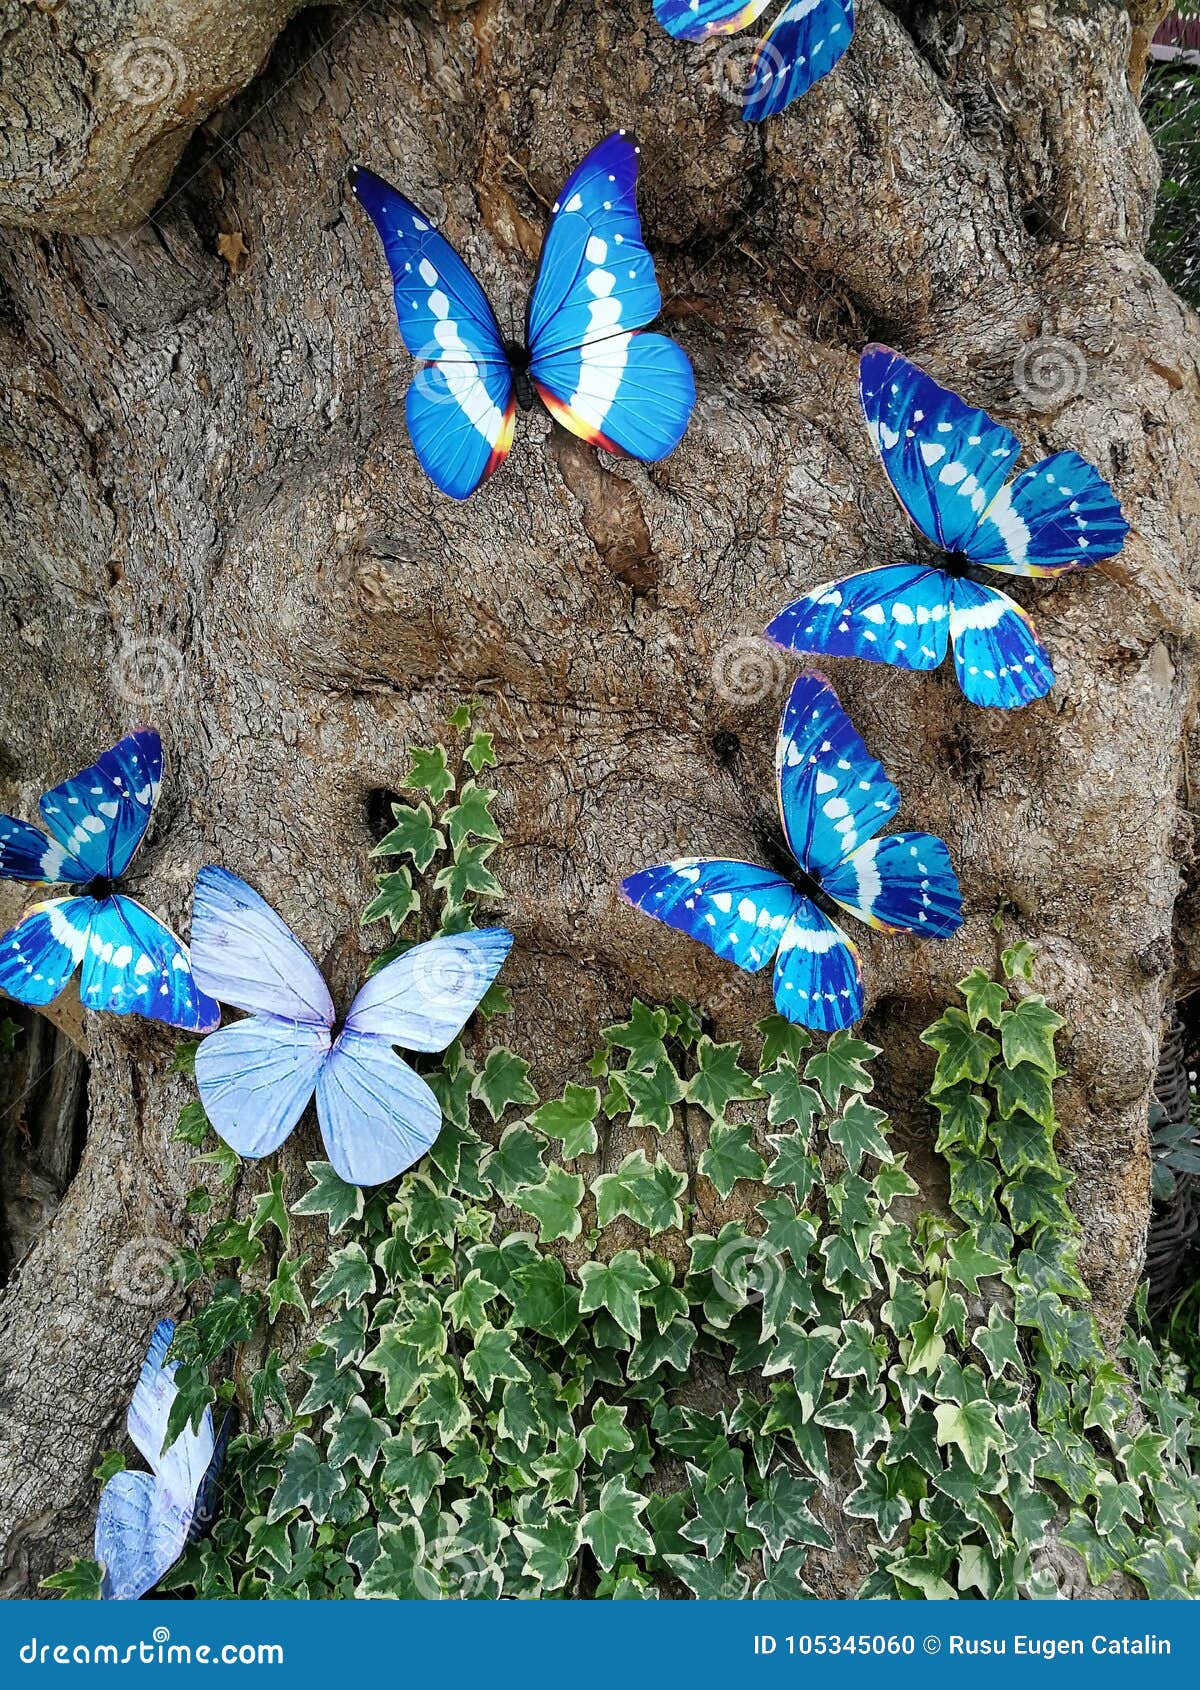 Blue butterflies in nature stock Image of background 105345060